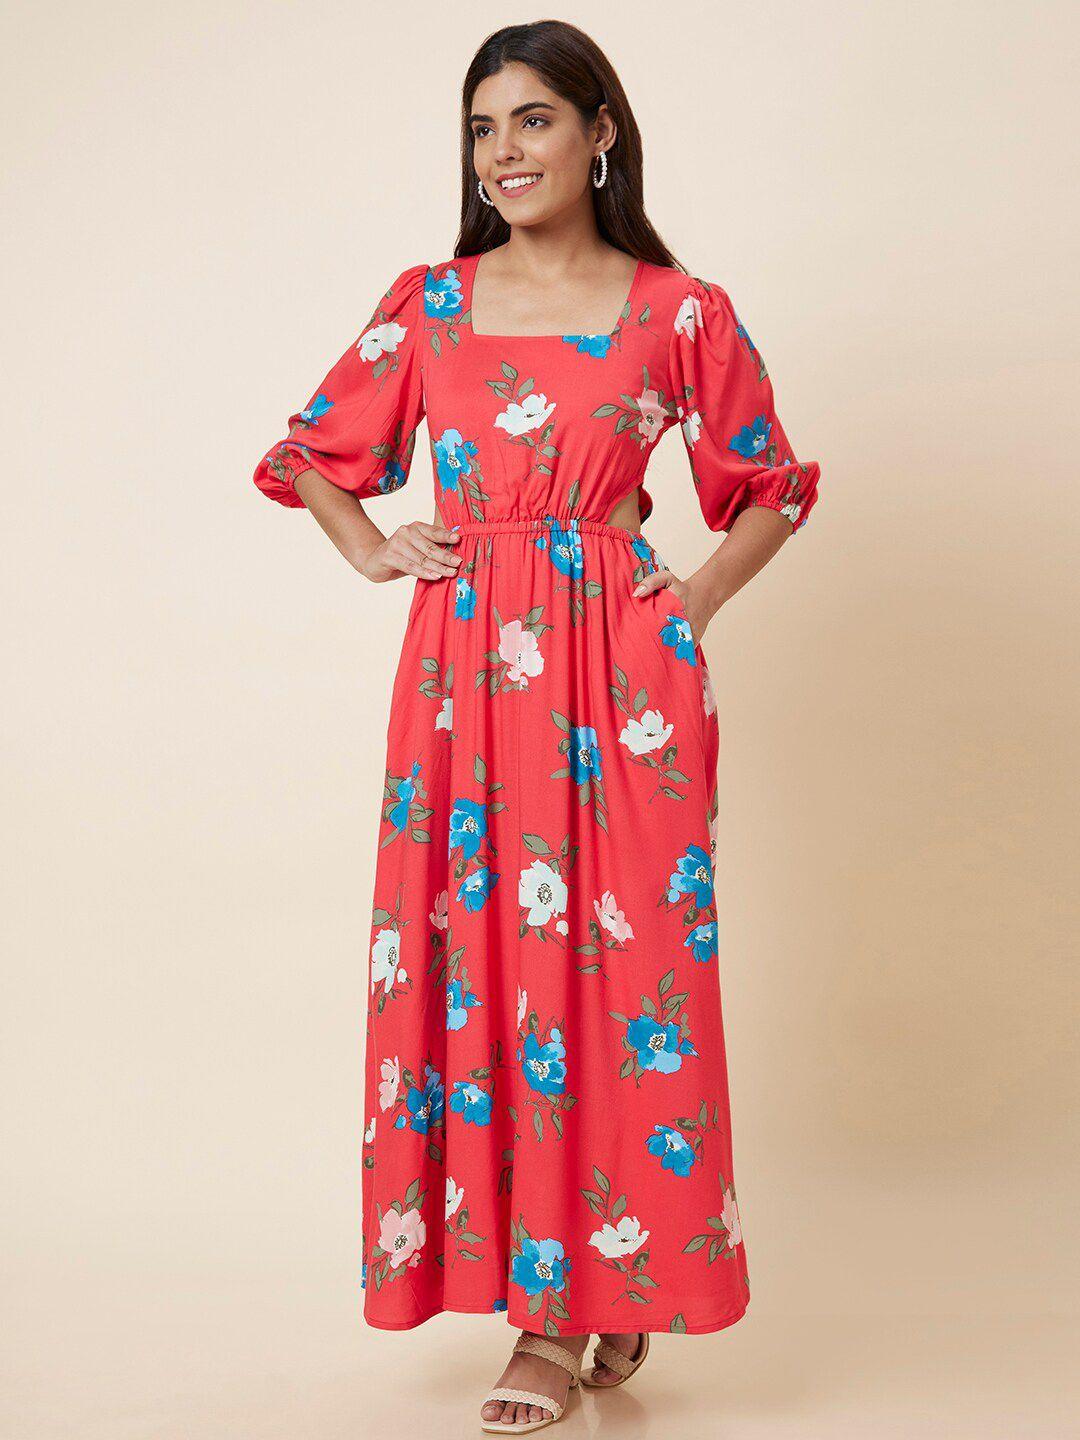 globus-floral-printed-puff-sleeve-cut-out-maxi-dress